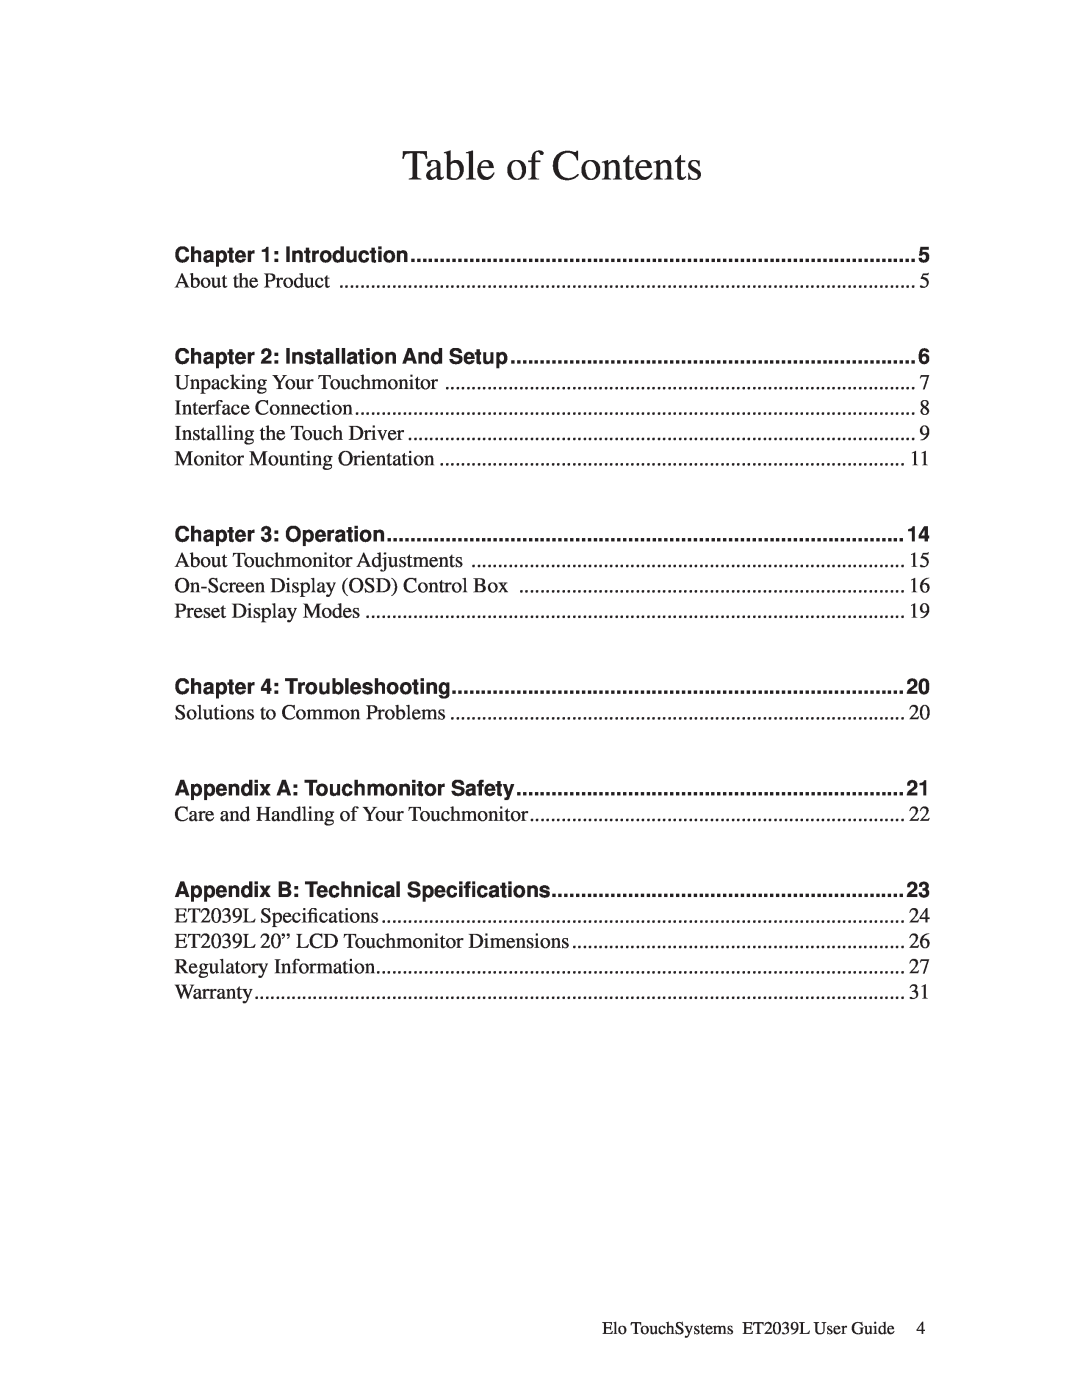 Elo TouchSystems ET2039L manual Table of Contents, Introduction, Installation And Setup, Operation, Troubleshooting 